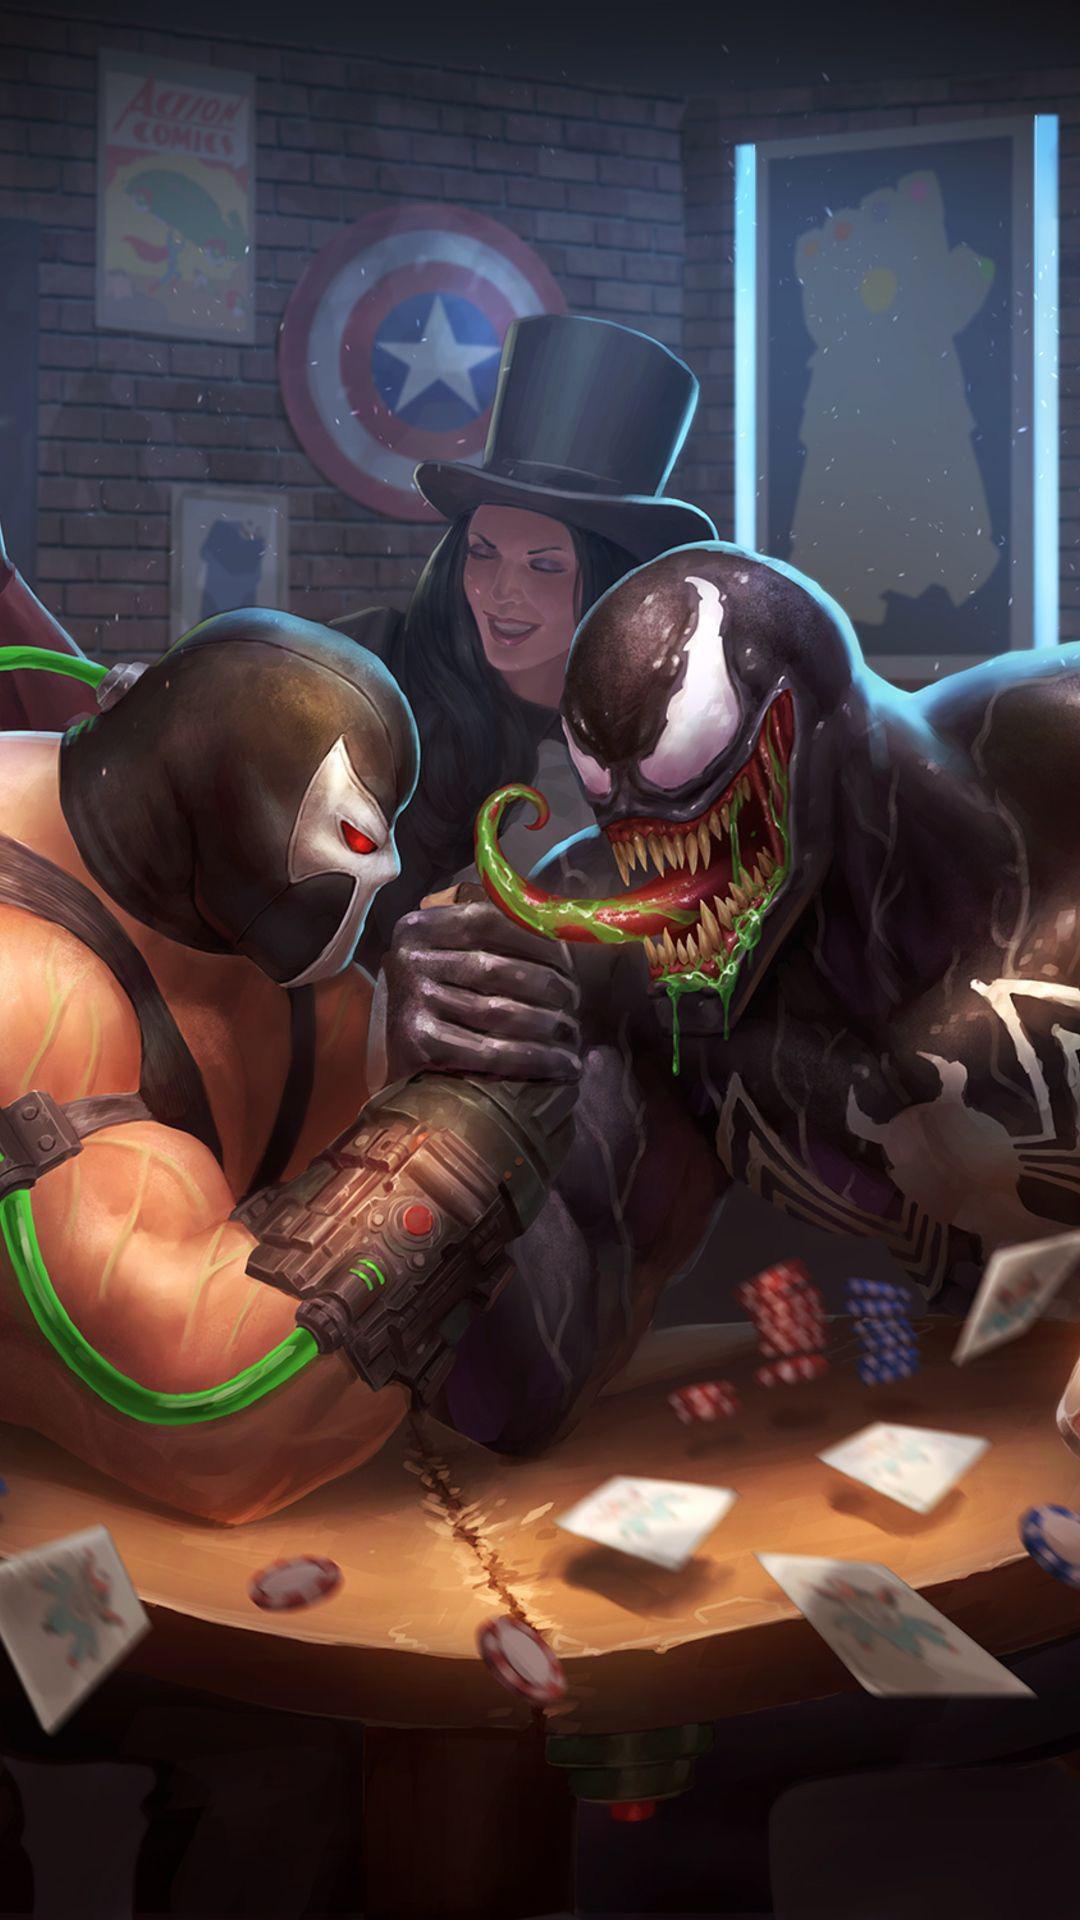 Arm Wrestling: Comic book characters competition, Bane vs Venom, Twisting wrists, Balance of Hand and Arm Pressures. 1080x1920 Full HD Wallpaper.